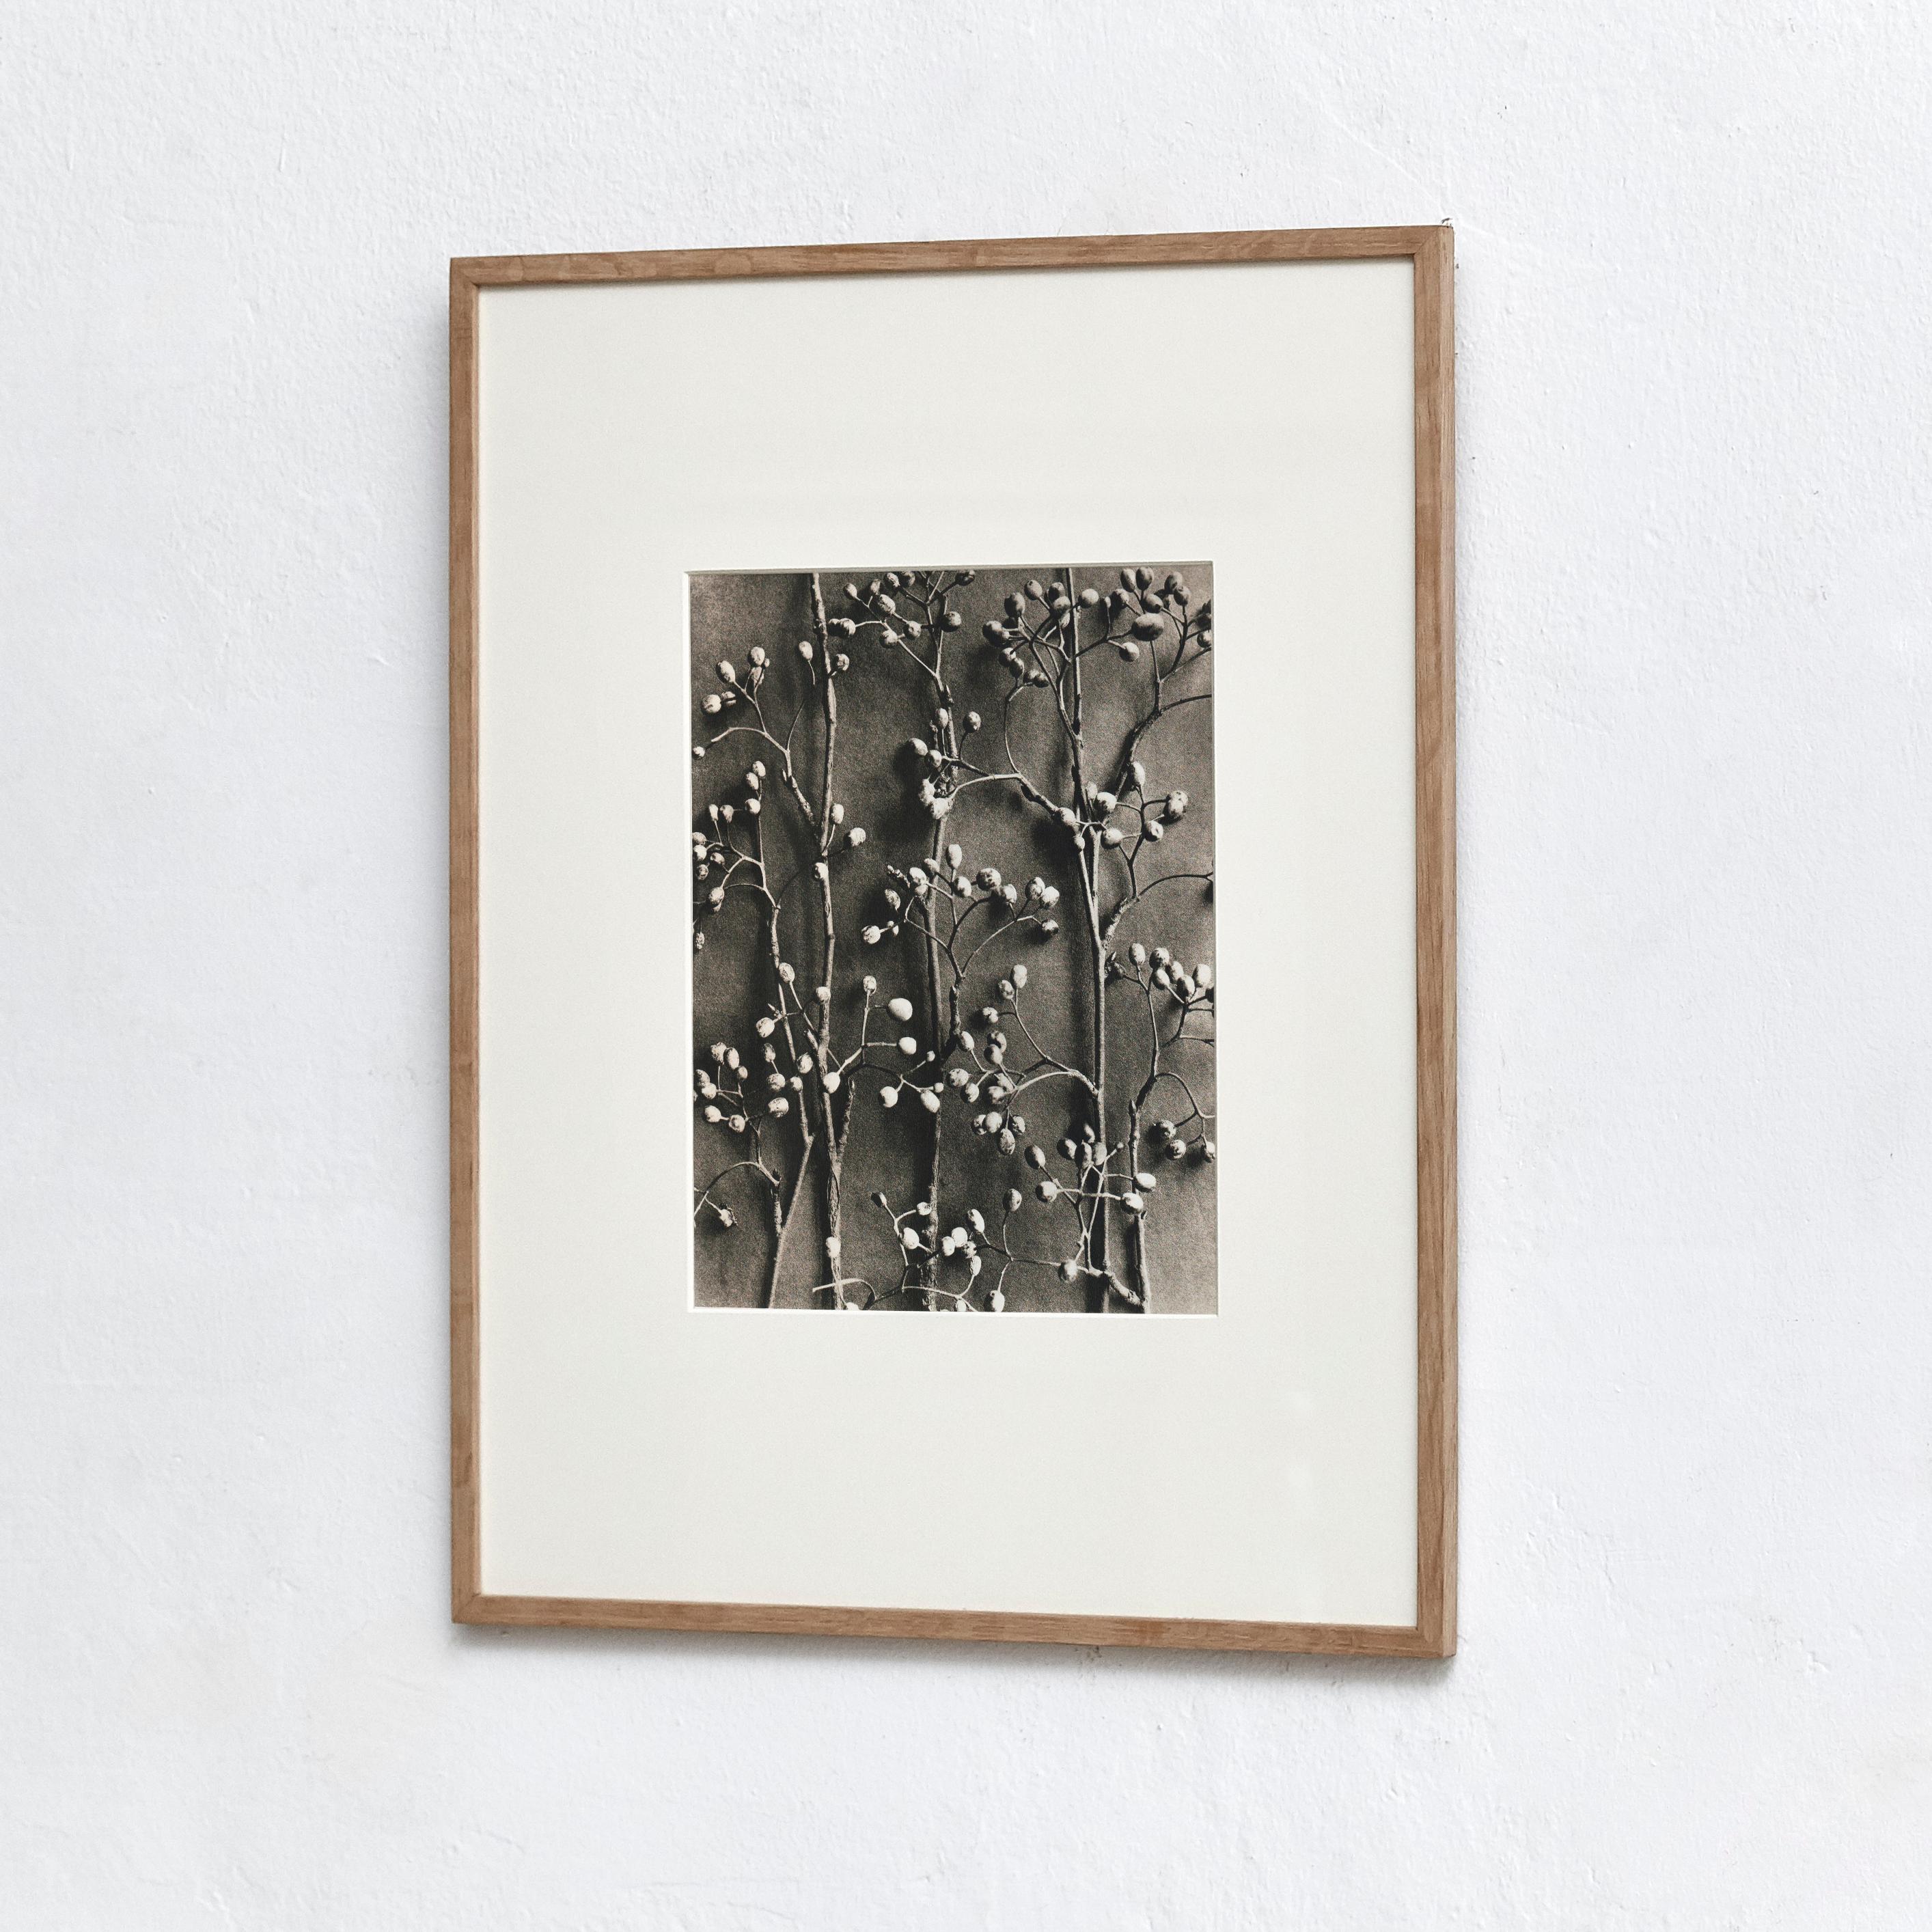 Karl Blossfeldt Photogravure from the edition of the book 'Wunder in der Natur' in 1942.

Photography number 15. 'Pirus alnifolia. Fruchtzweige in 1/2 facher Vergrößerung.'

In original condition, with minor wear consistent with age and use,